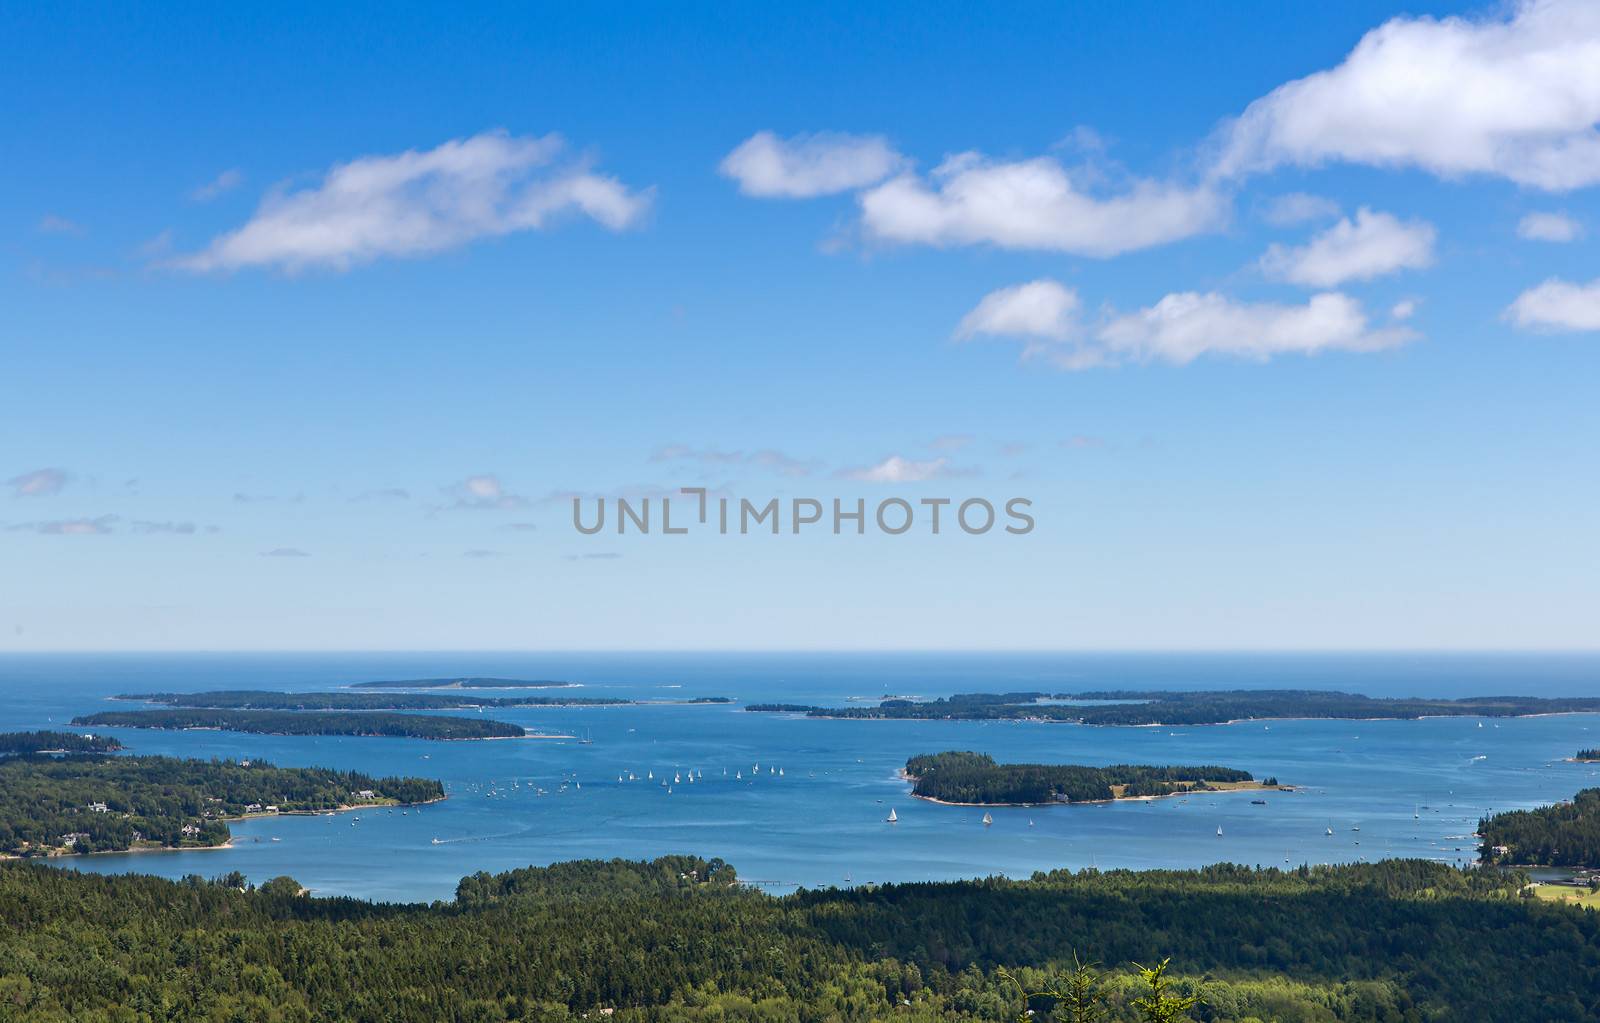 This is looking at Bar Harbor from Beech Mountain in Acadia National Park, Maine